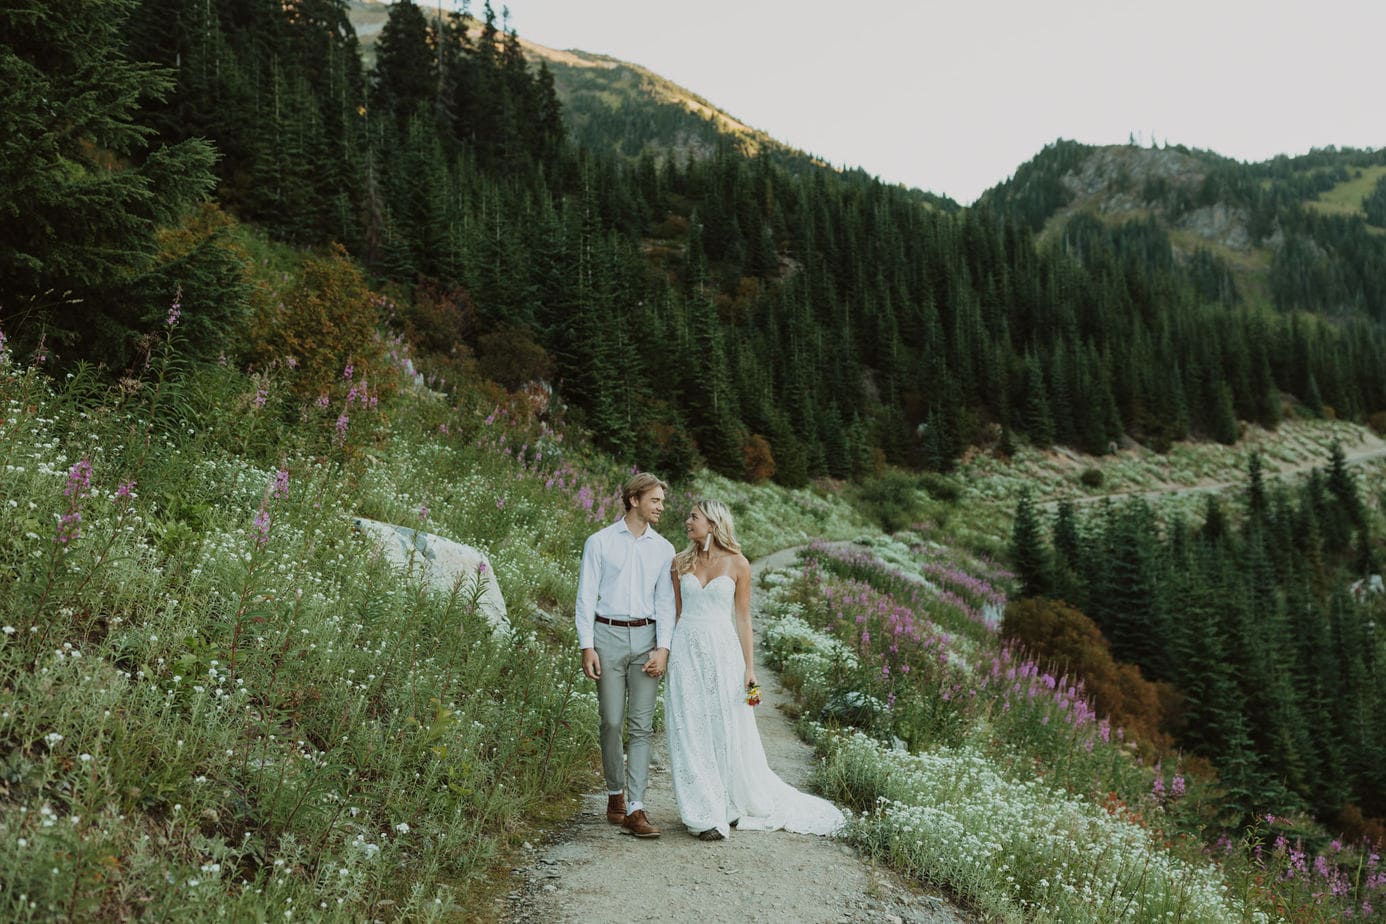 Couple waking through a wildflower meadow on their elopement in Chilliwack, BC.